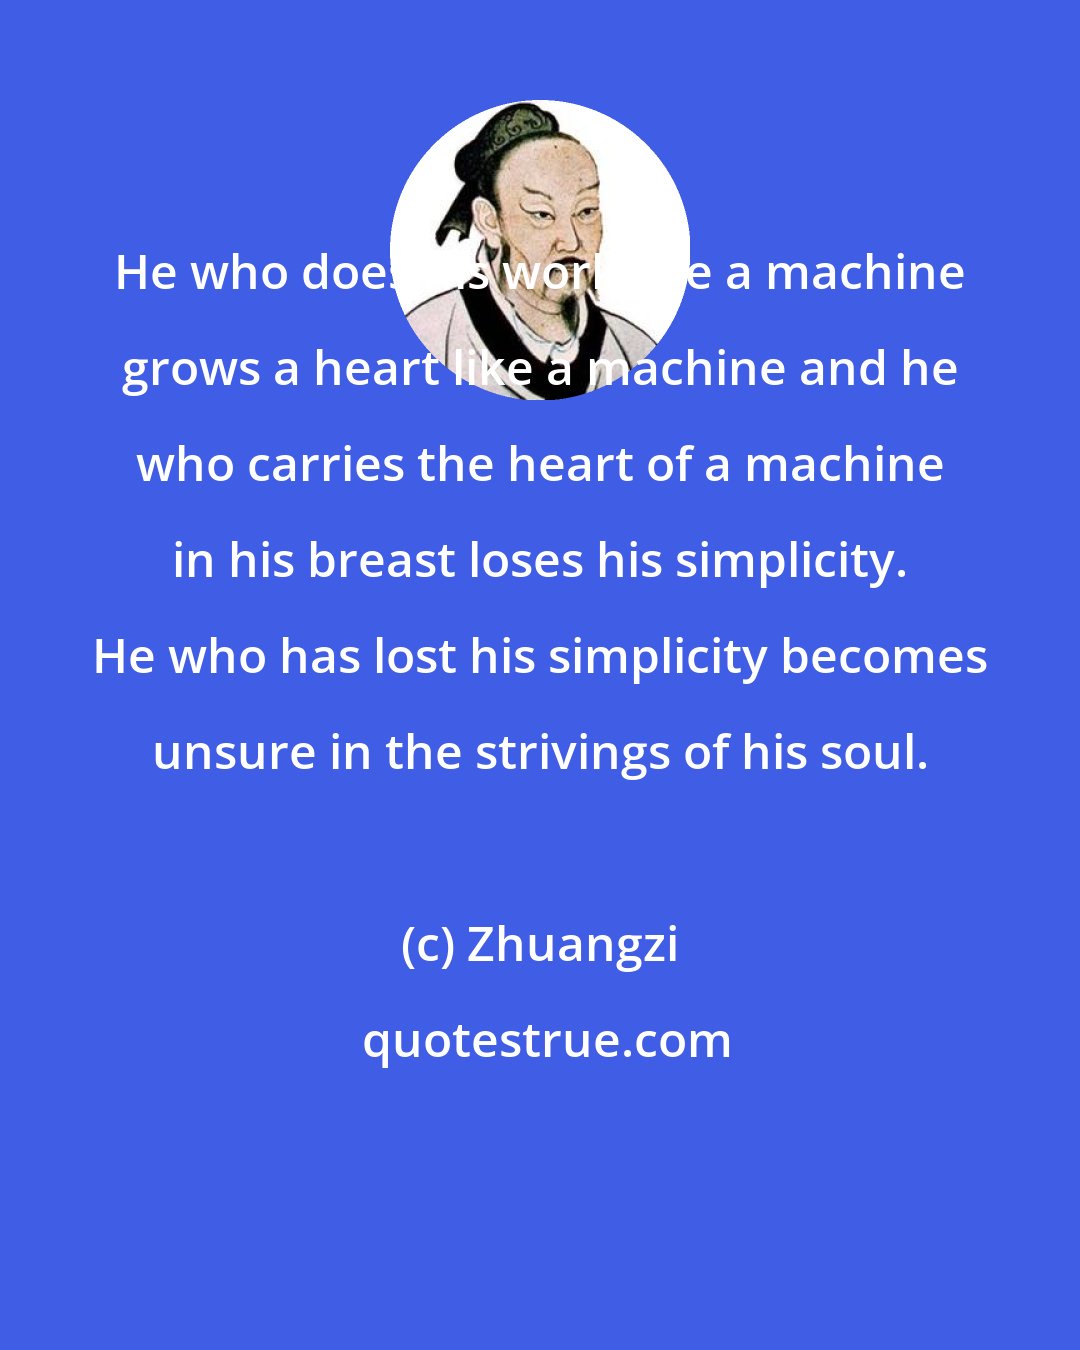 Zhuangzi: He who does his work like a machine grows a heart like a machine and he who carries the heart of a machine in his breast loses his simplicity. He who has lost his simplicity becomes unsure in the strivings of his soul.